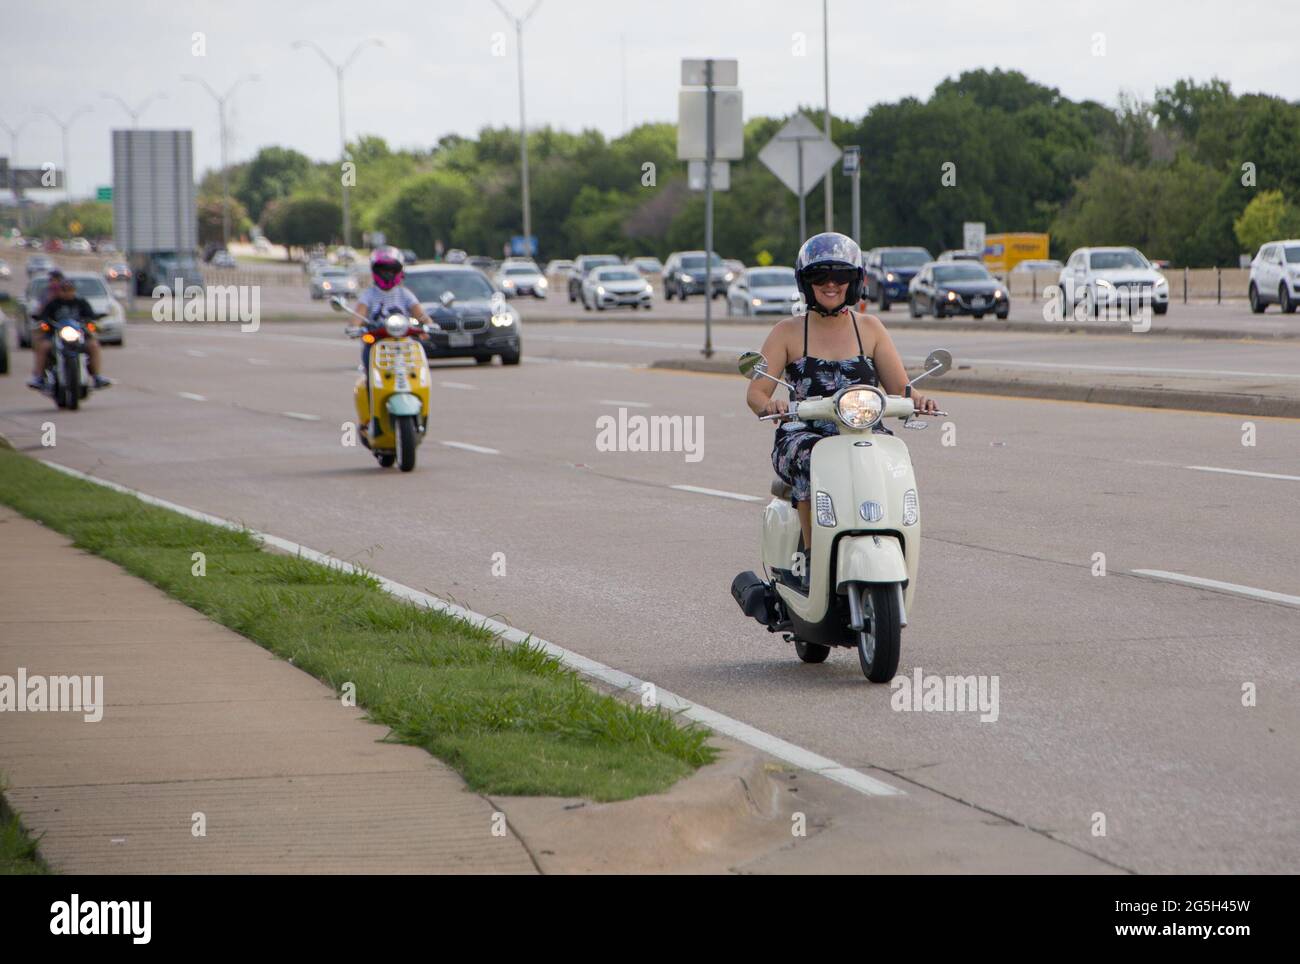 Plano, USA. 27th June, 2021. People ride Vespa during the National Vespa Parade Day in Plano, Texas, the United States, on June 27, 2021. Nearly 50 Vespa enthusiasts participated in a Vespa parade in Plano on Sunday. Credit: Dan Tian/Xinhua/Alamy Live News Stock Photo